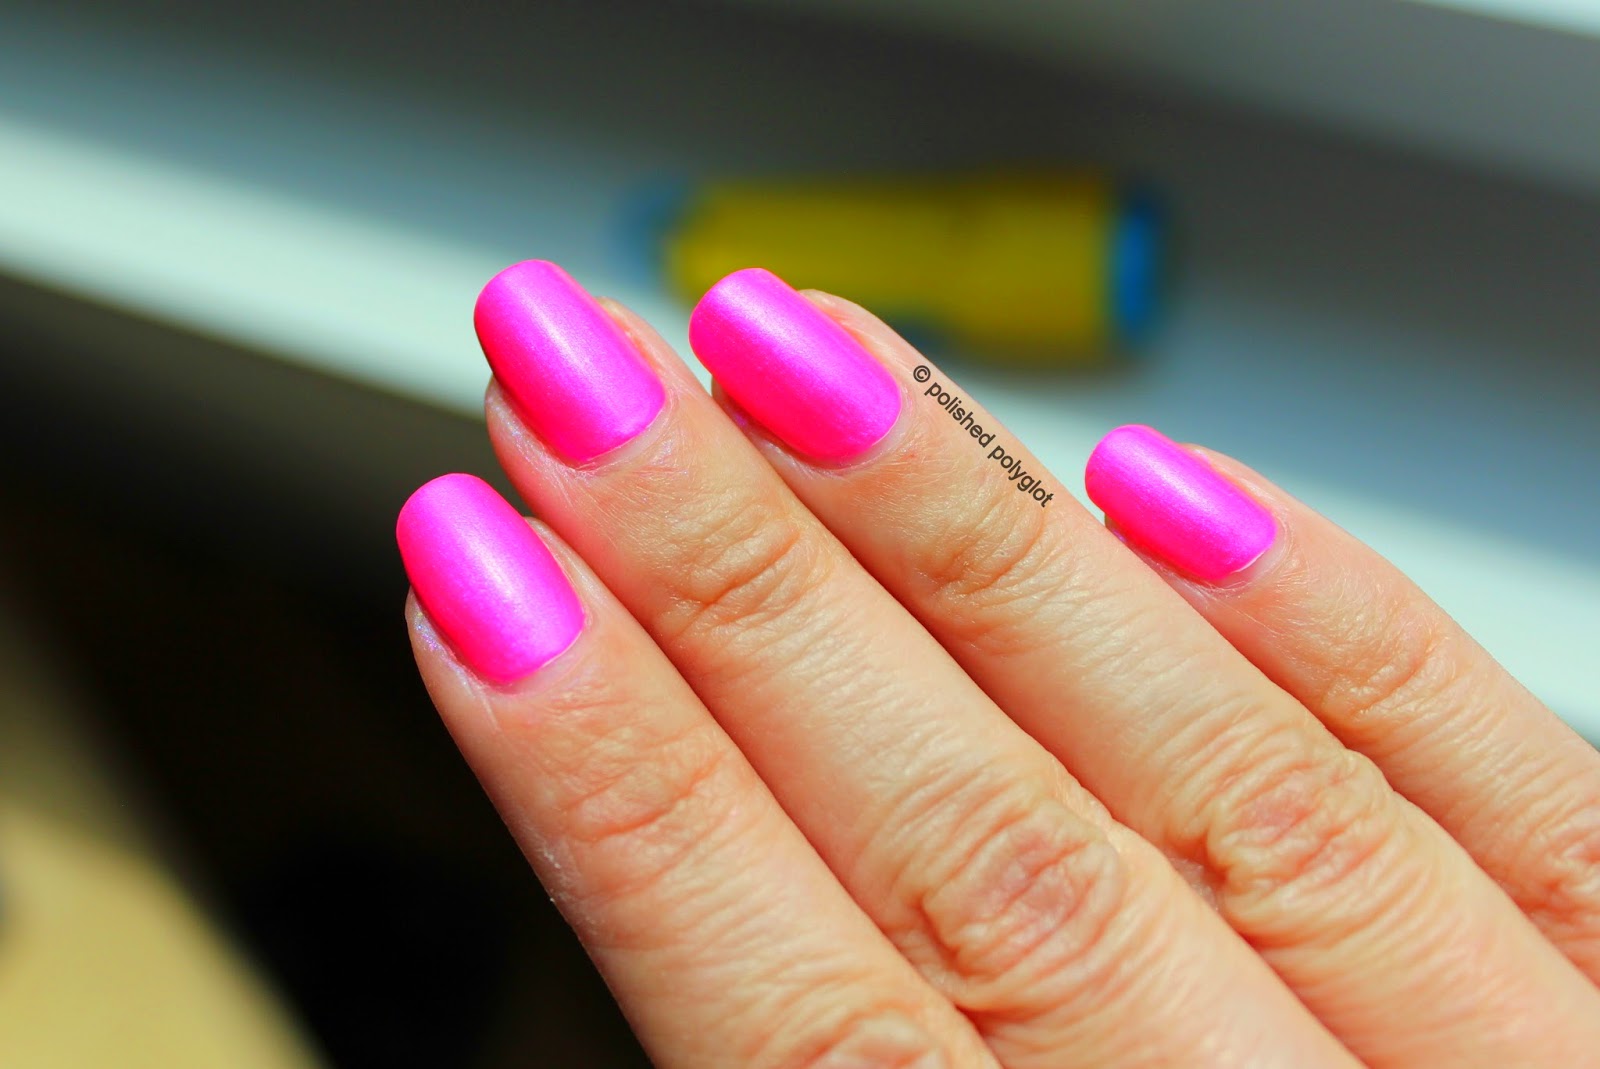 4. OPI Hotter Than You Pink Nail Lacquer - wide 2